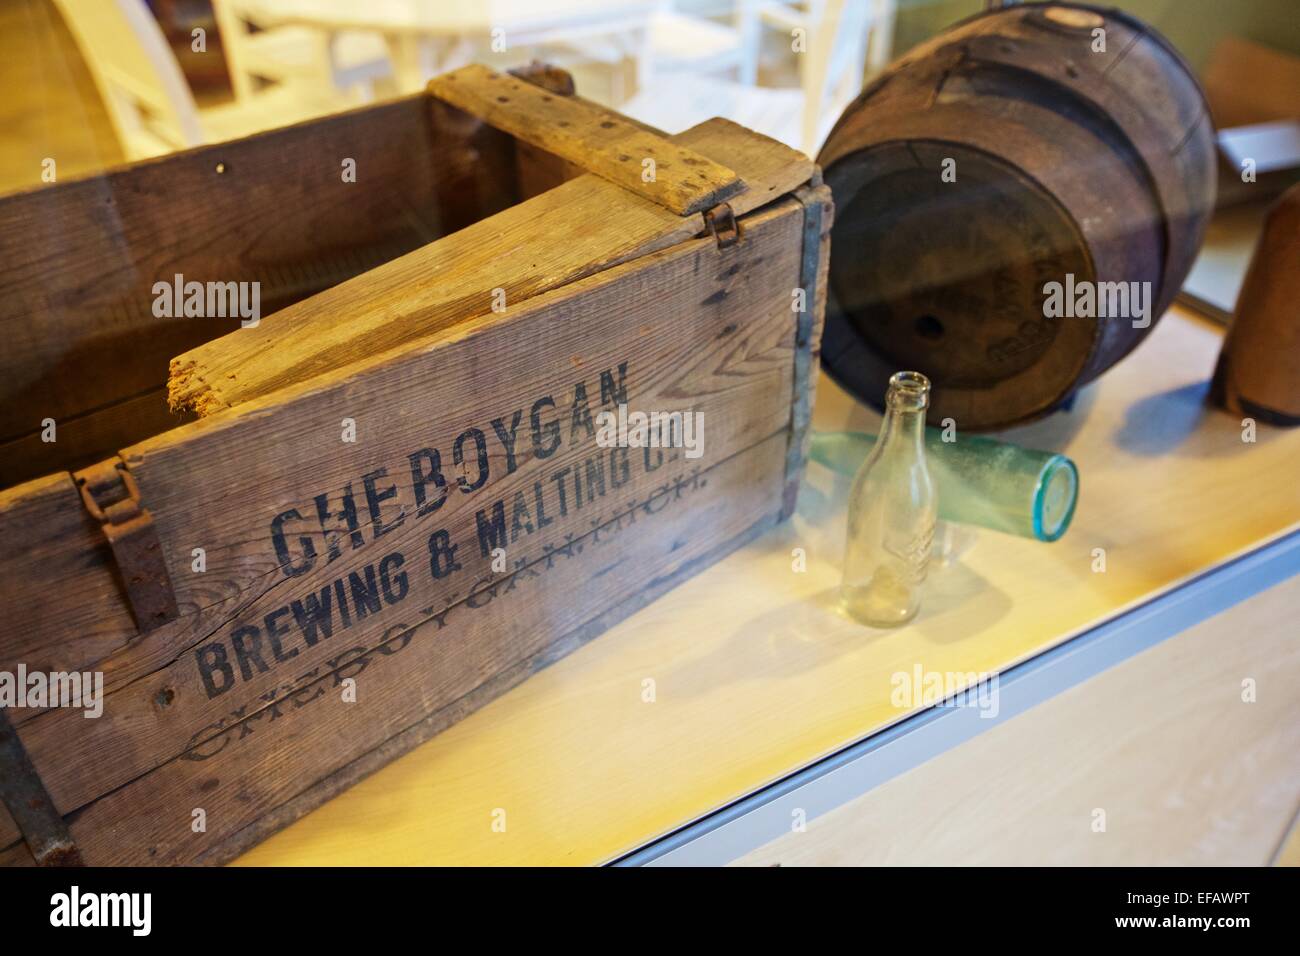 Display of an old wooden crate and barrel from Cheboygan Brewing and Malting Company Stock Photo